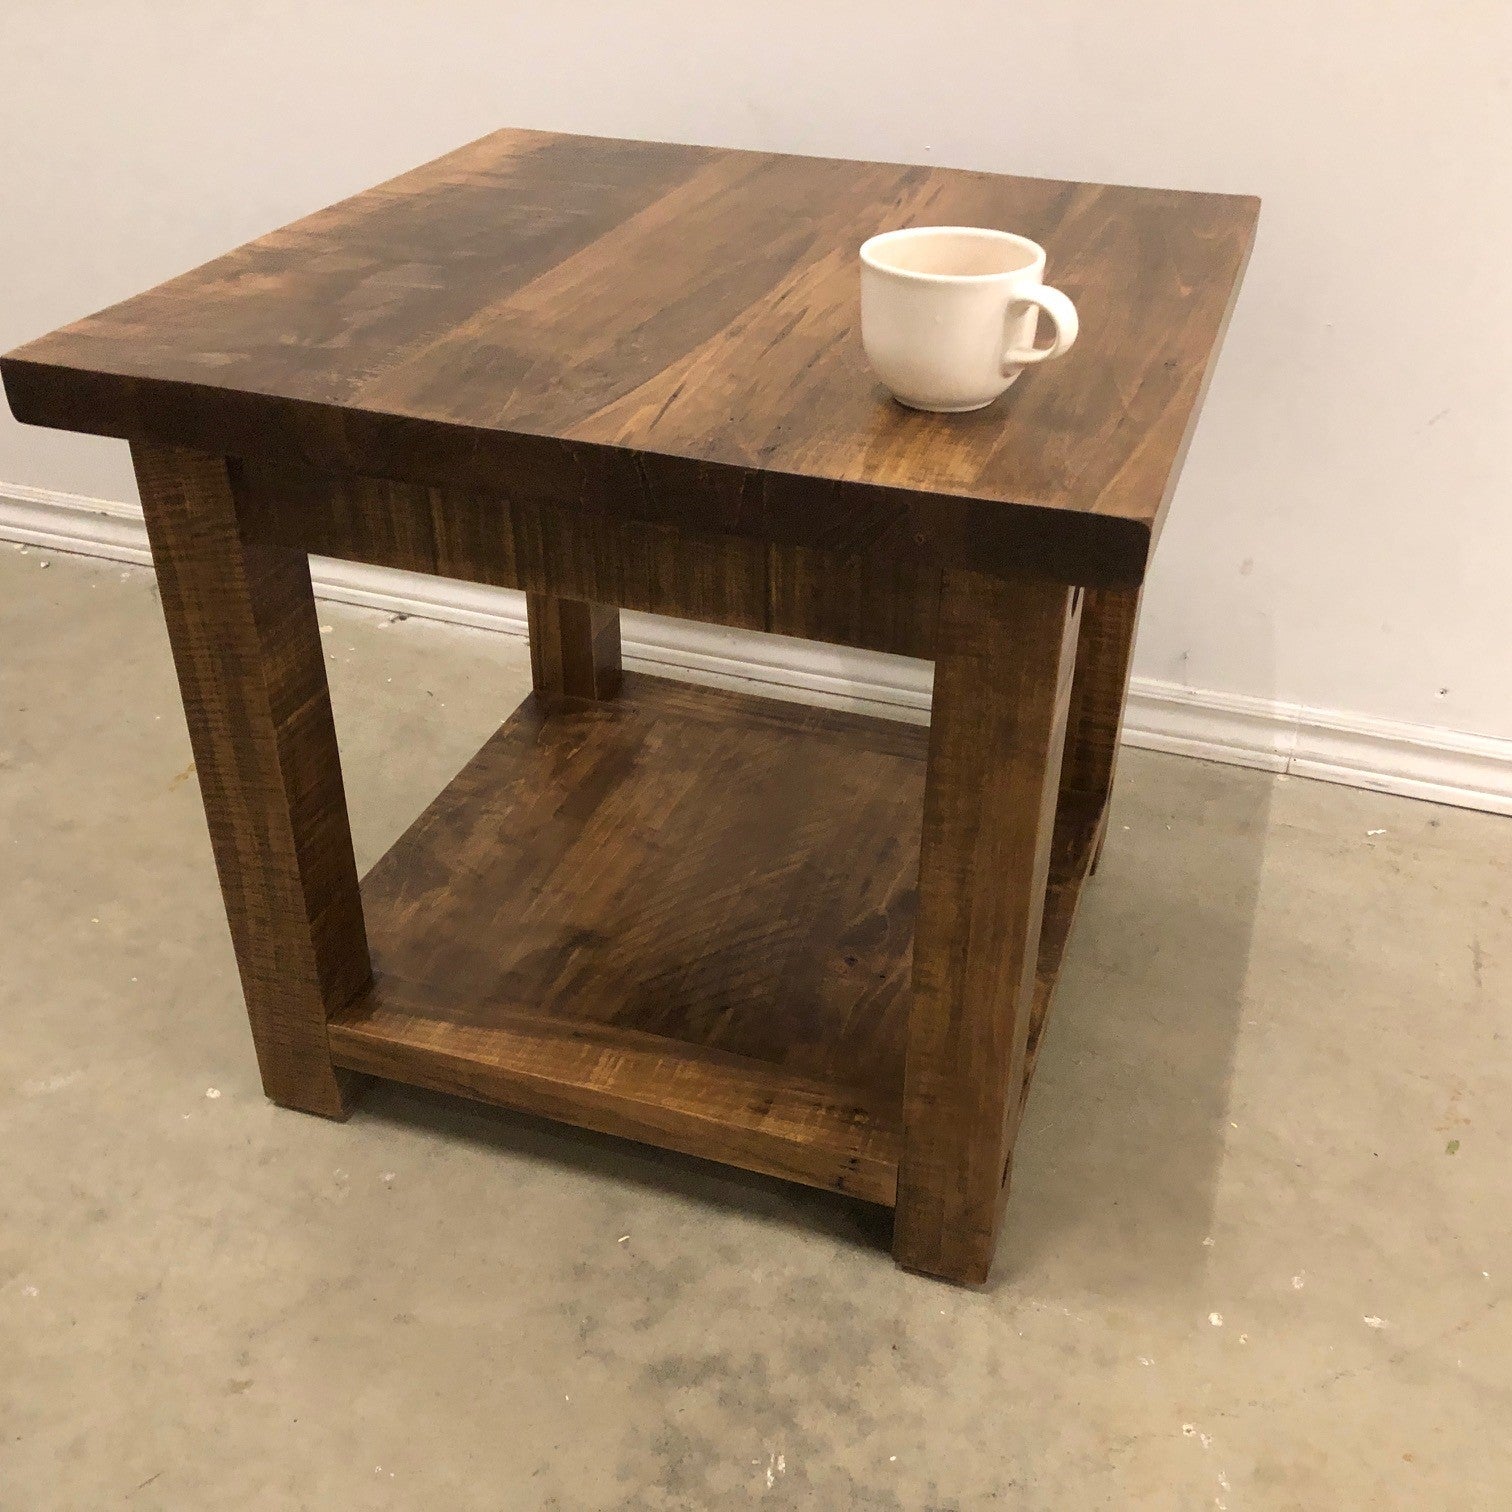 ADIRONDACK HAND MADE END TABLE